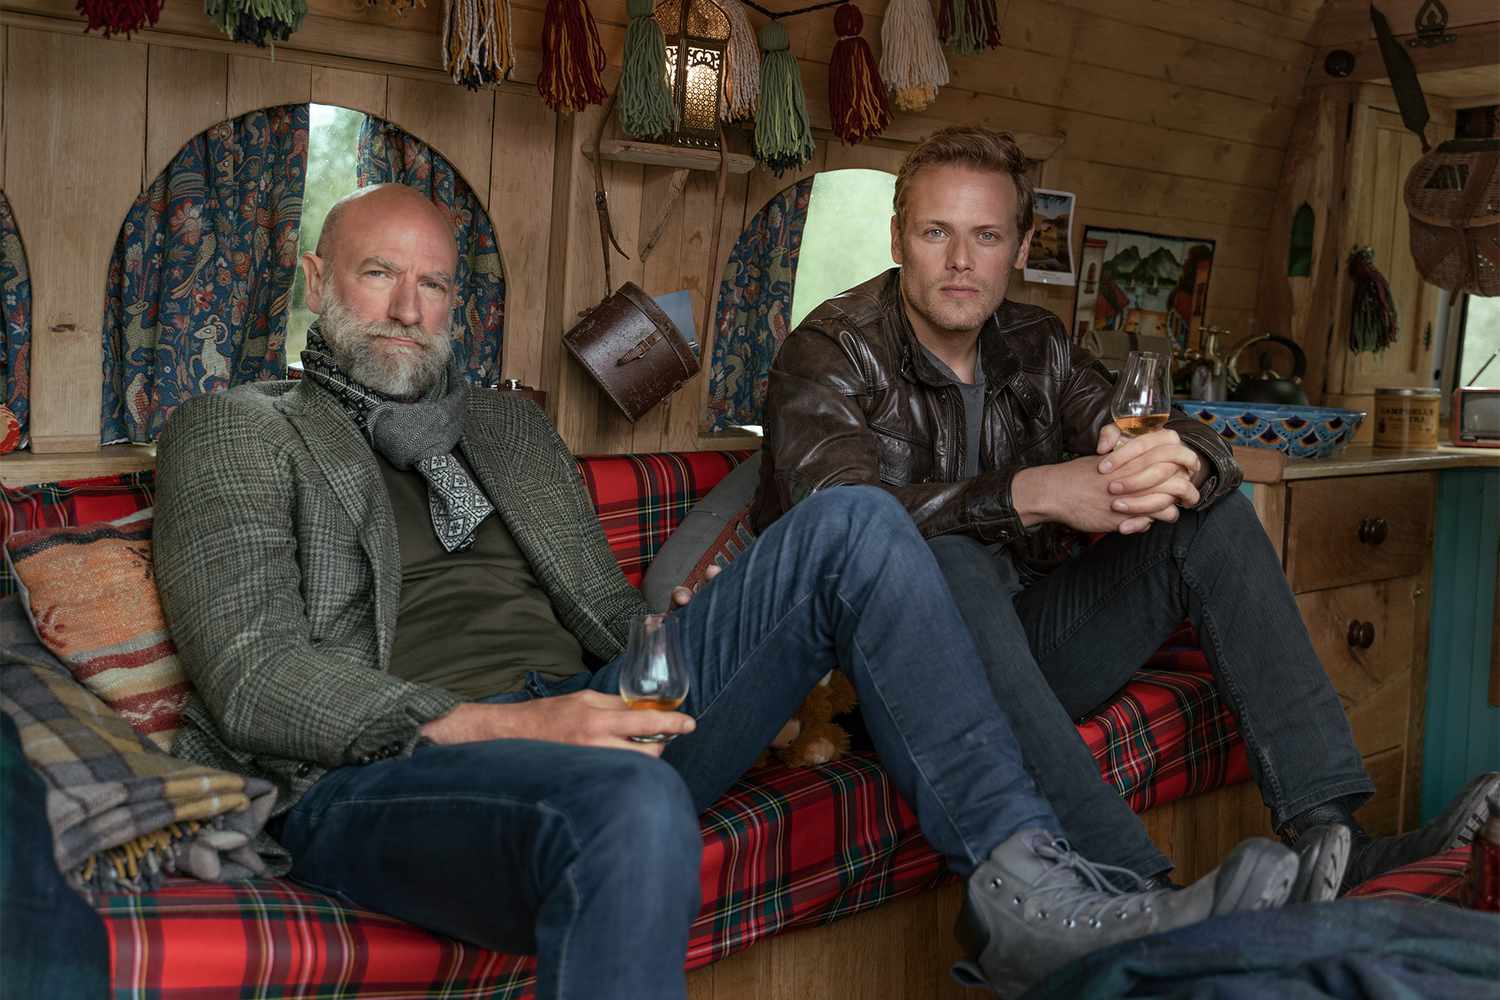 MEN IN KILTS: A ROADTRIP WITH SAM AND GRAHAM